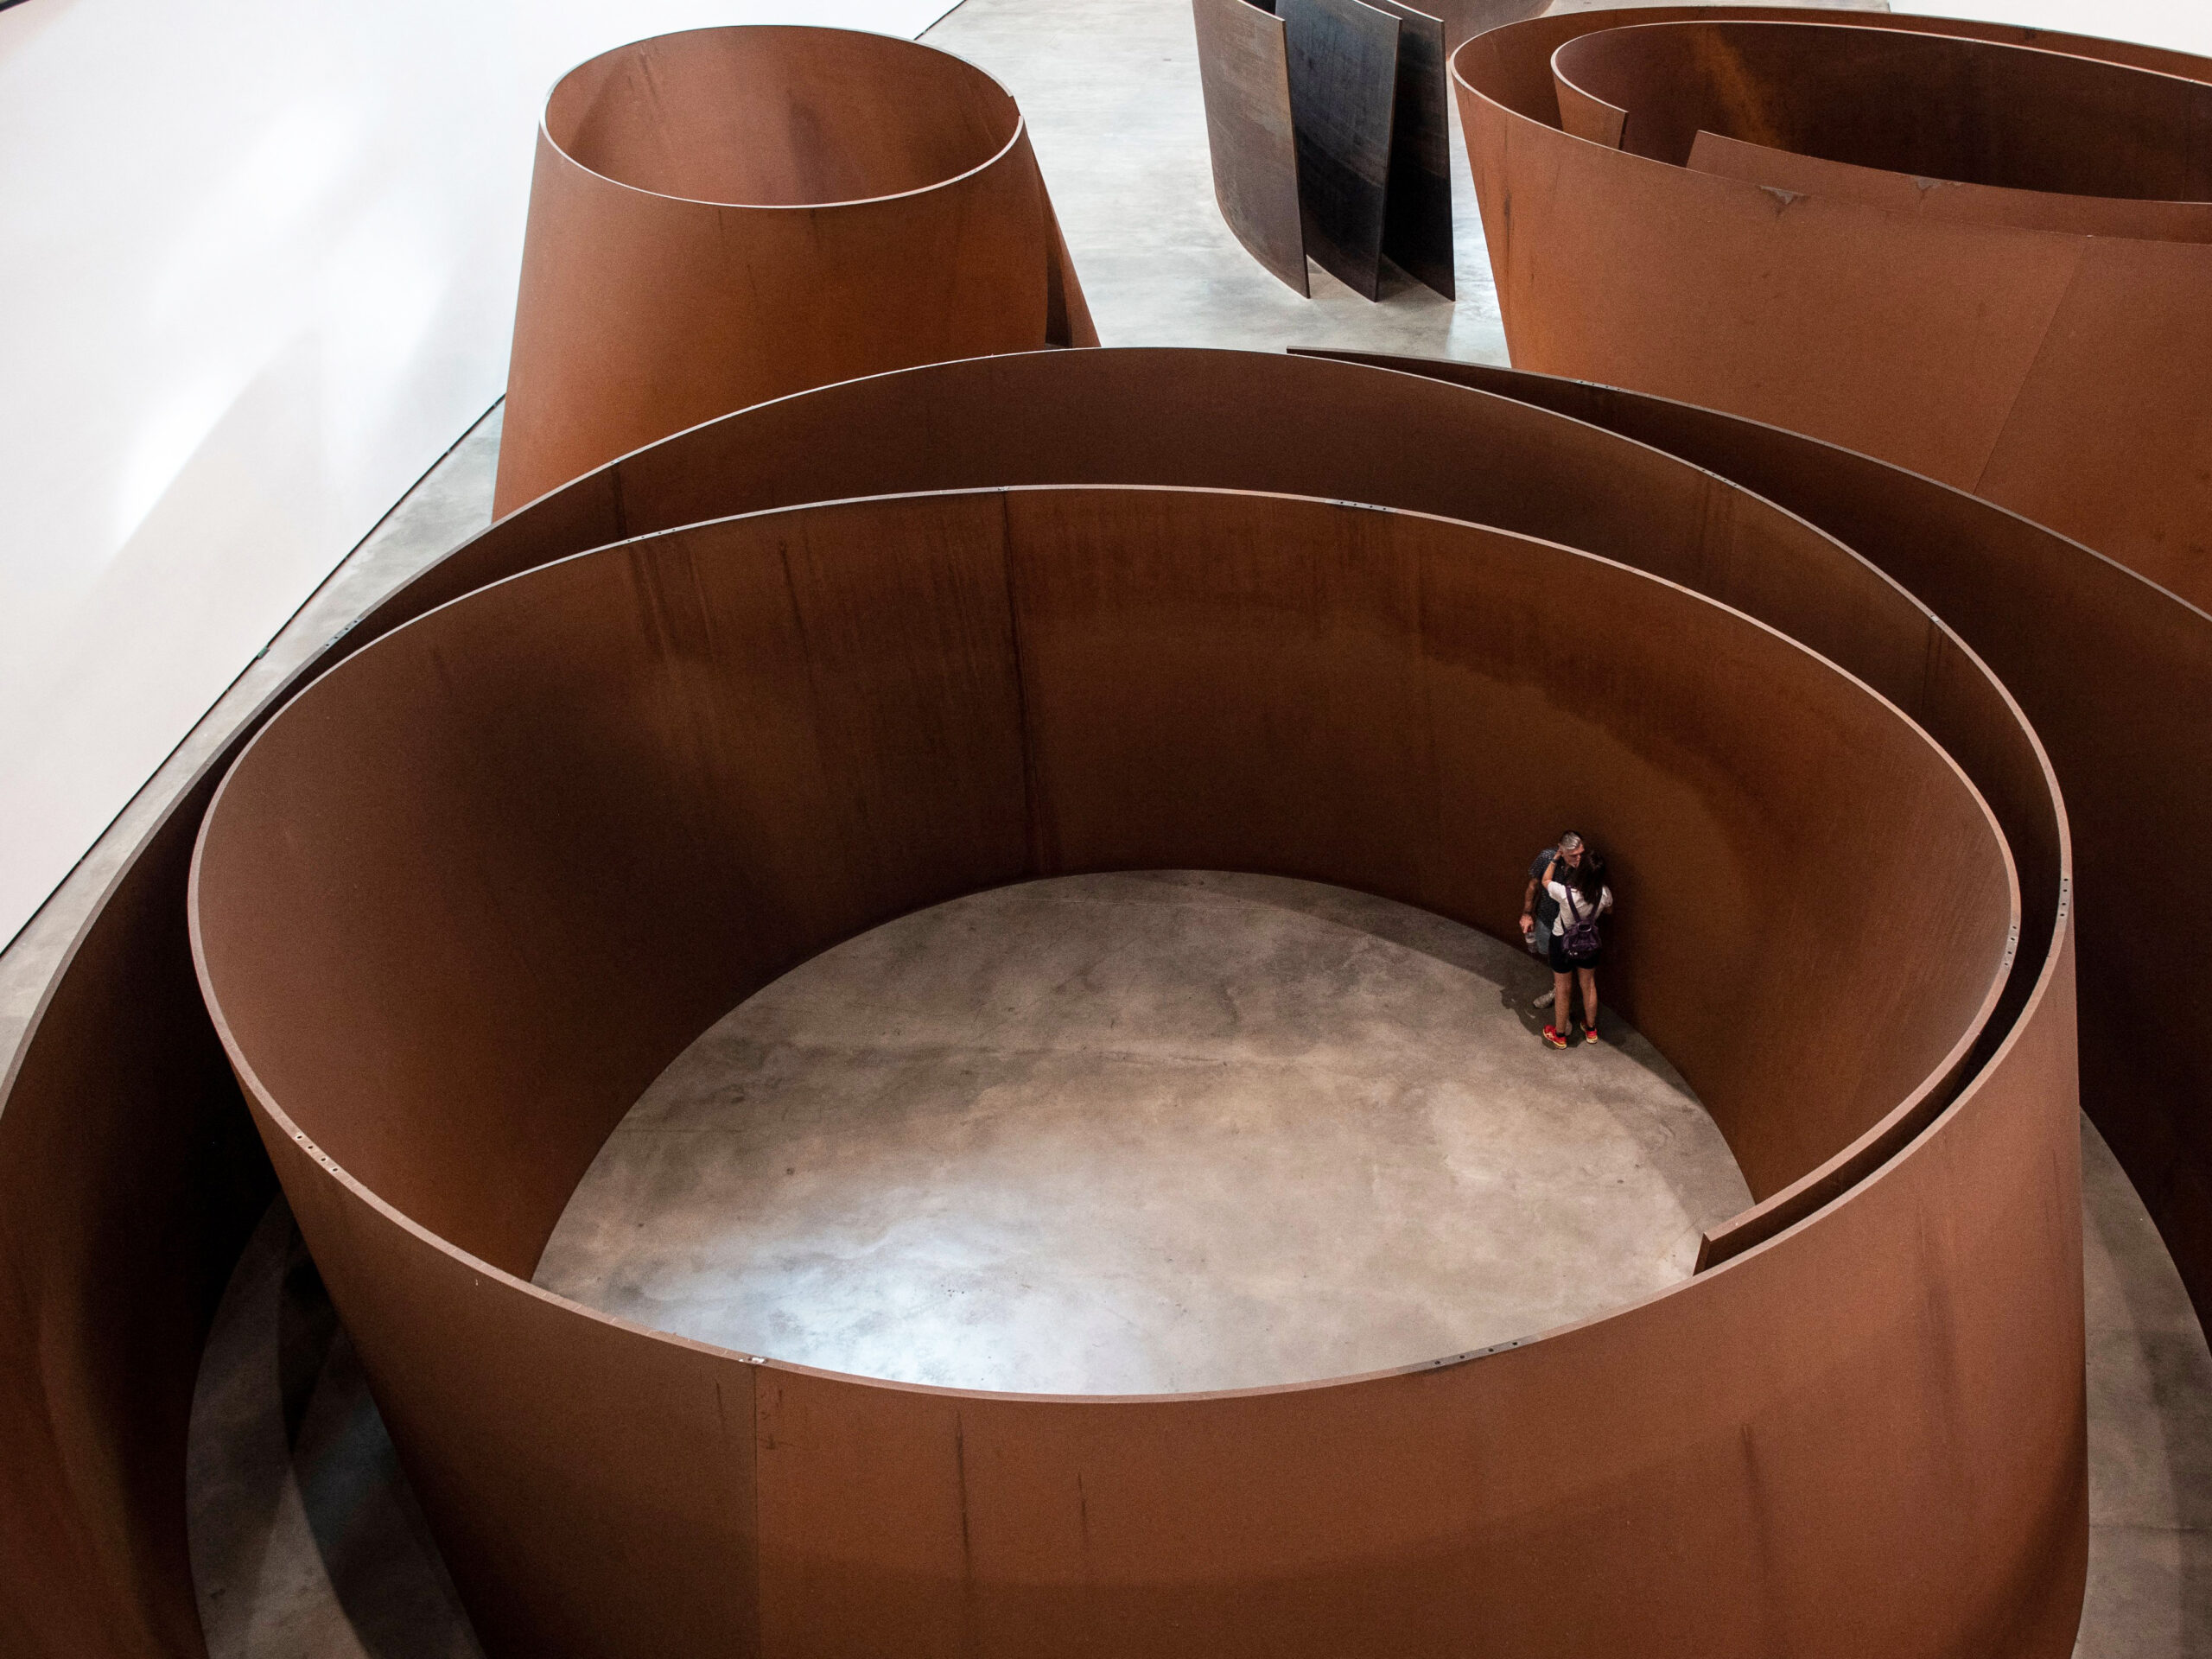 Visitors look at the artwork "The Matter of Time" by US artist Richard Serra during the presentation of the "25 Years of the Museum Collection" exhibition on the 25th anniversary of the Guggenheim Museum Bilbao in the Spanish Basque city of Bilbao on Oct. 18, 2022.